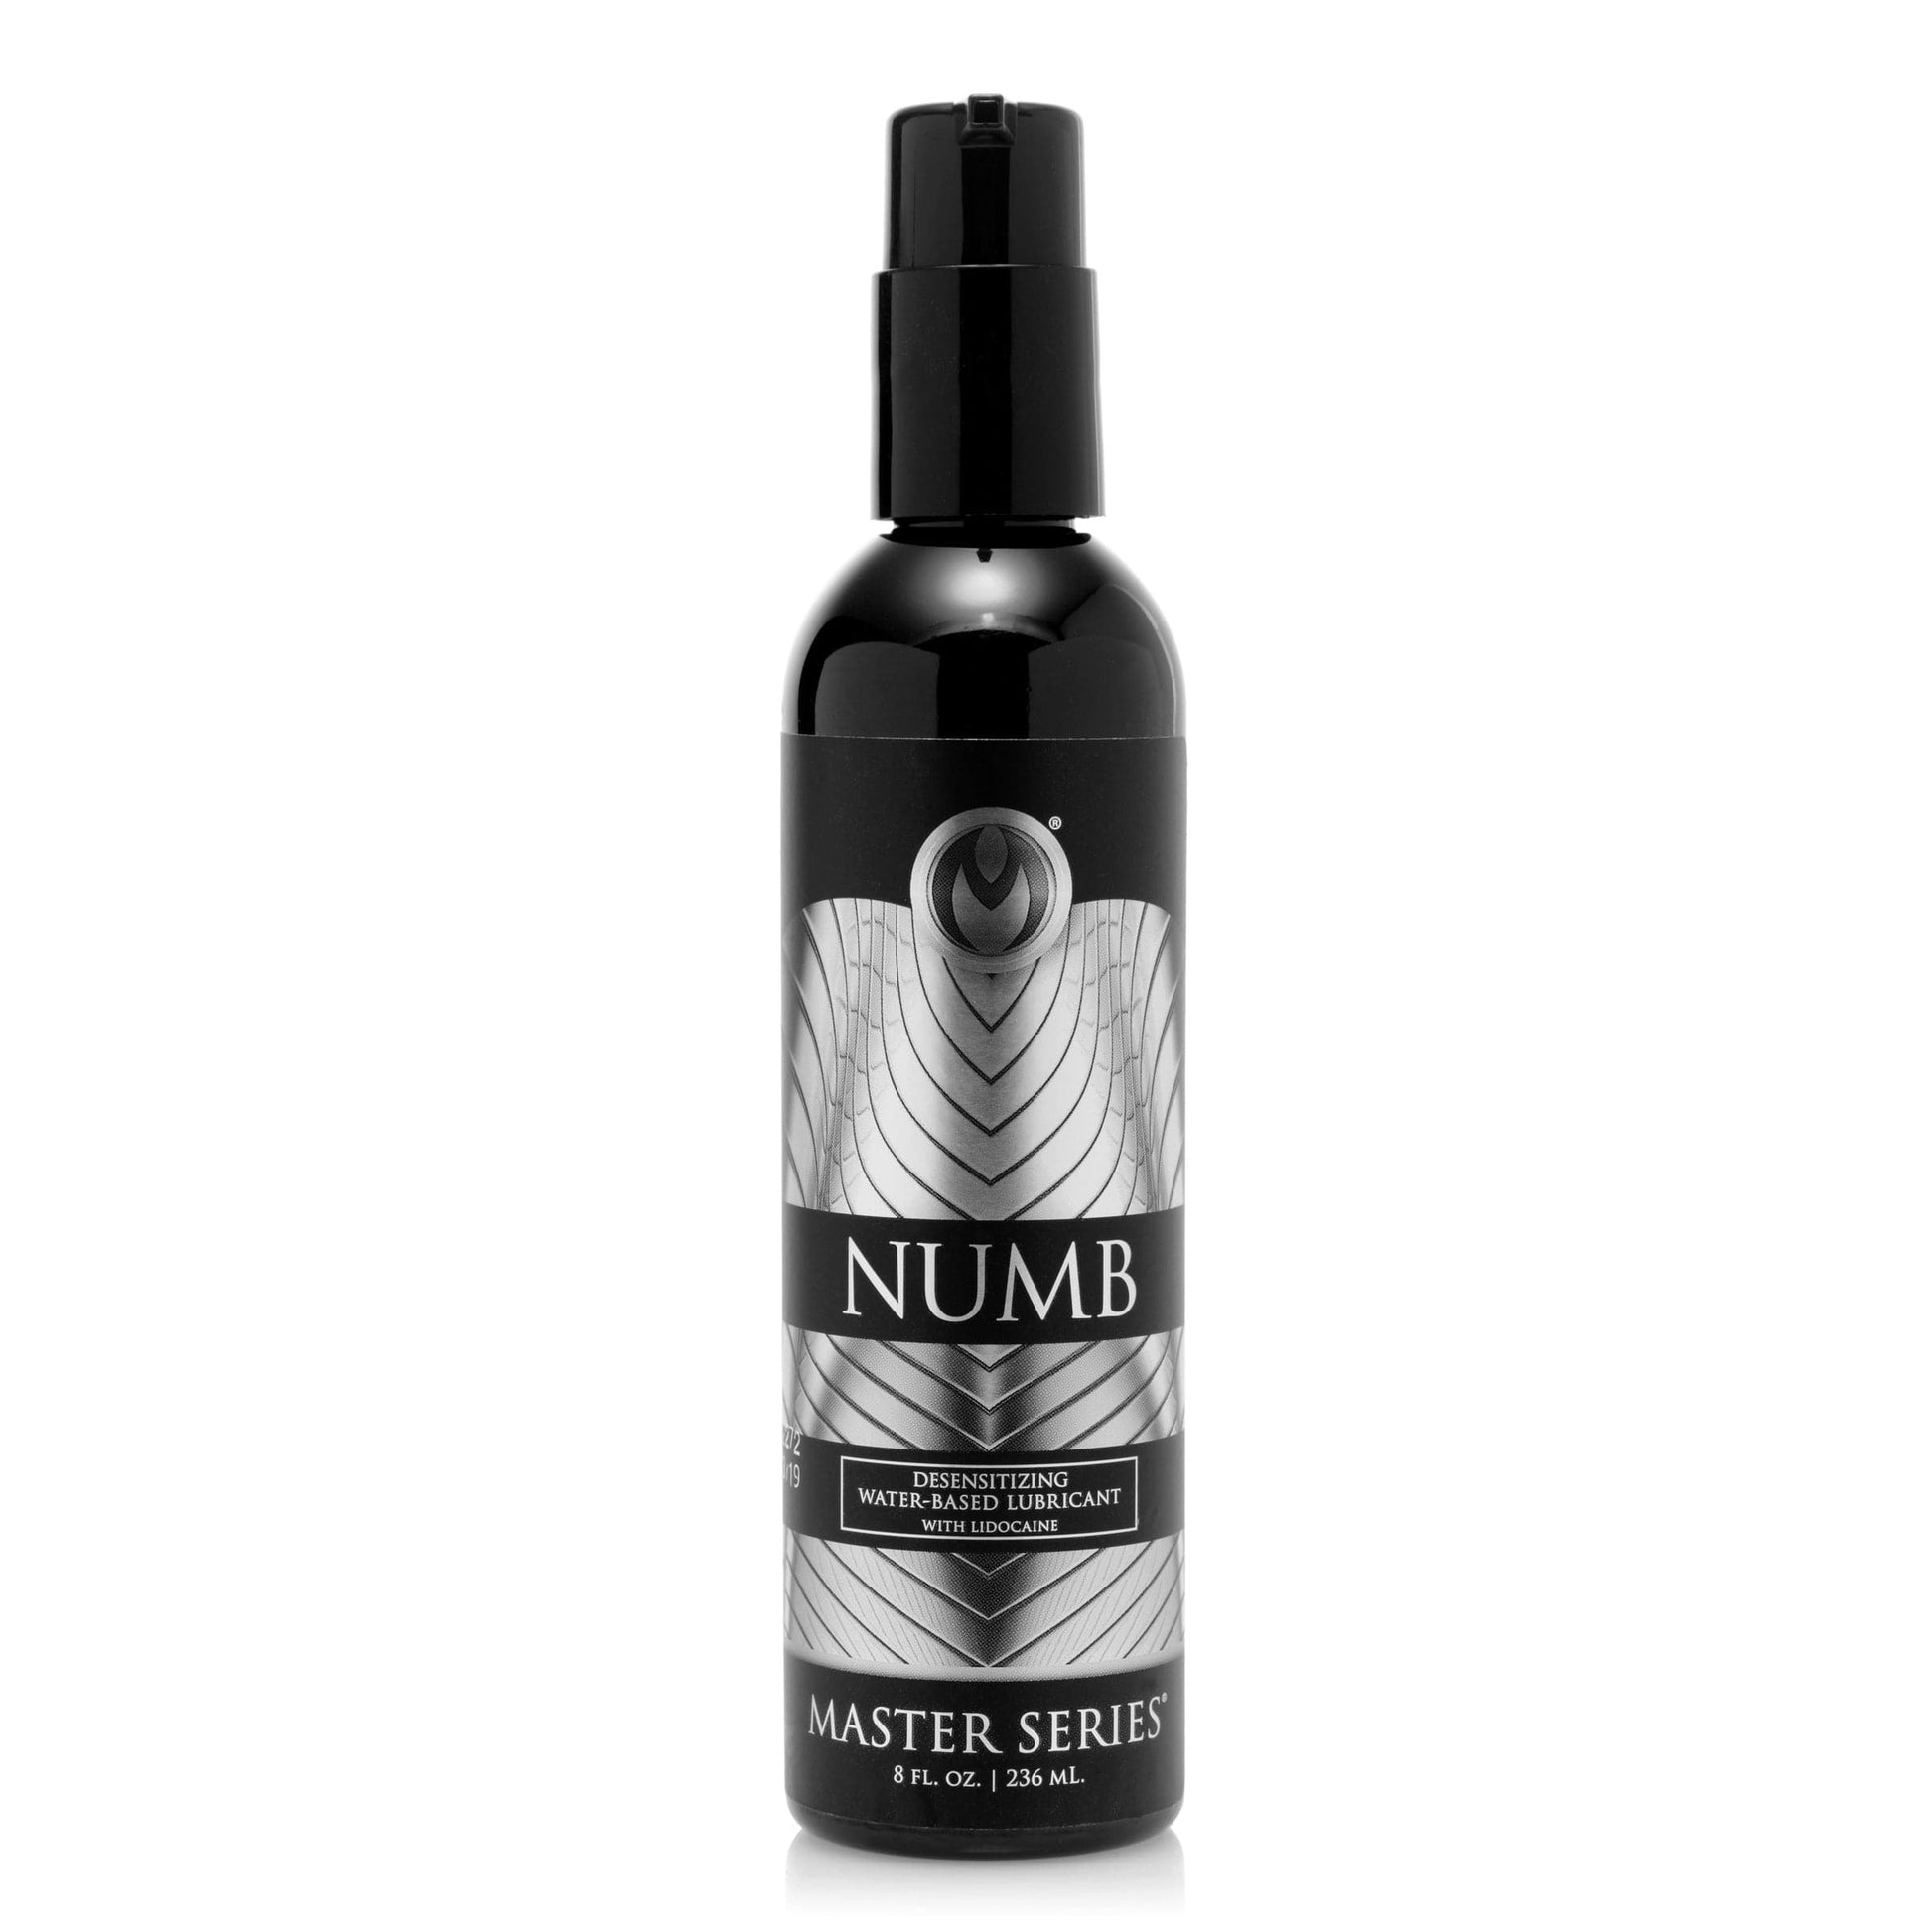 Master Series Water Based Lubricant Numb Desensitizing Water Based Lubricant With Lidocaine - 8 Oz at the Haus of Shag